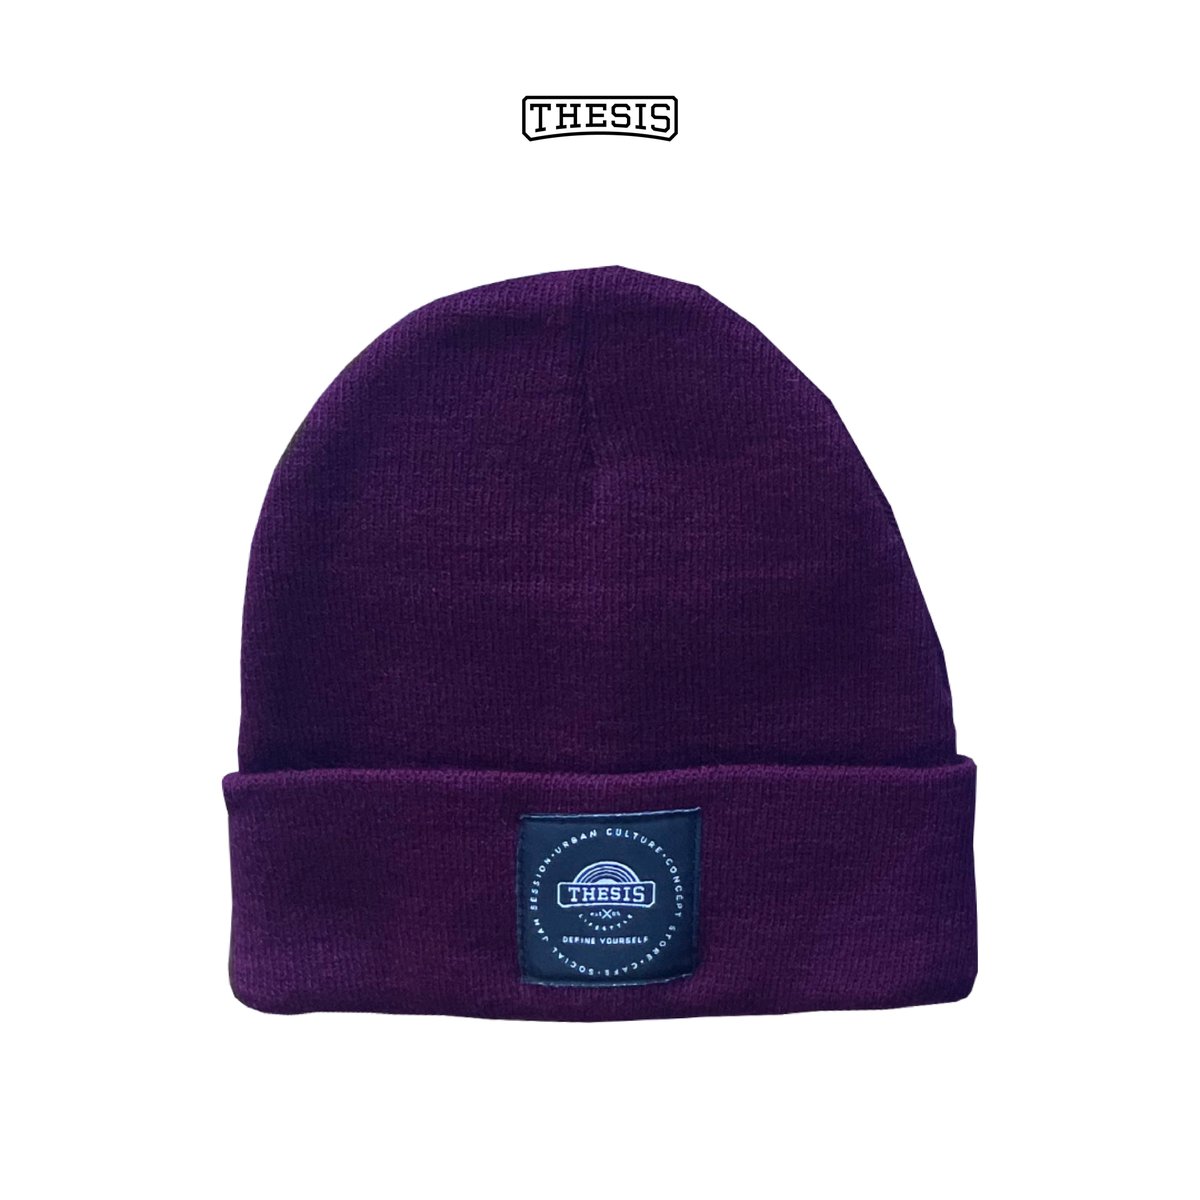 We have a wide range of colours in our Thesis essential beanies // R130 available at our Soweto stores. #ThisIsThesis